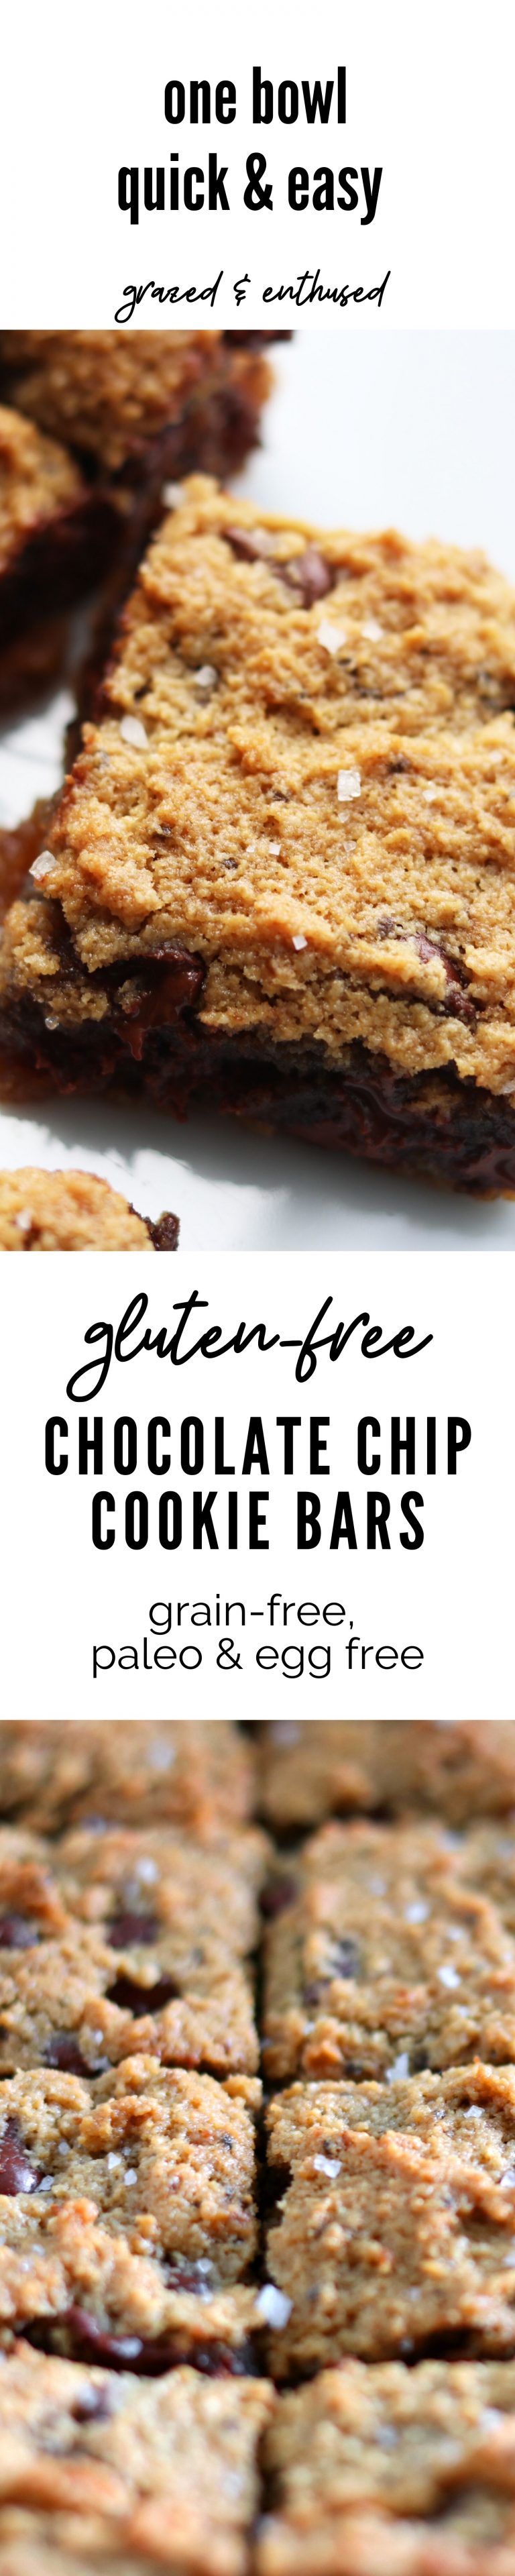 Paleo One-Bowl Chocolate Chip Cookie Bars | Grazed & Enthused